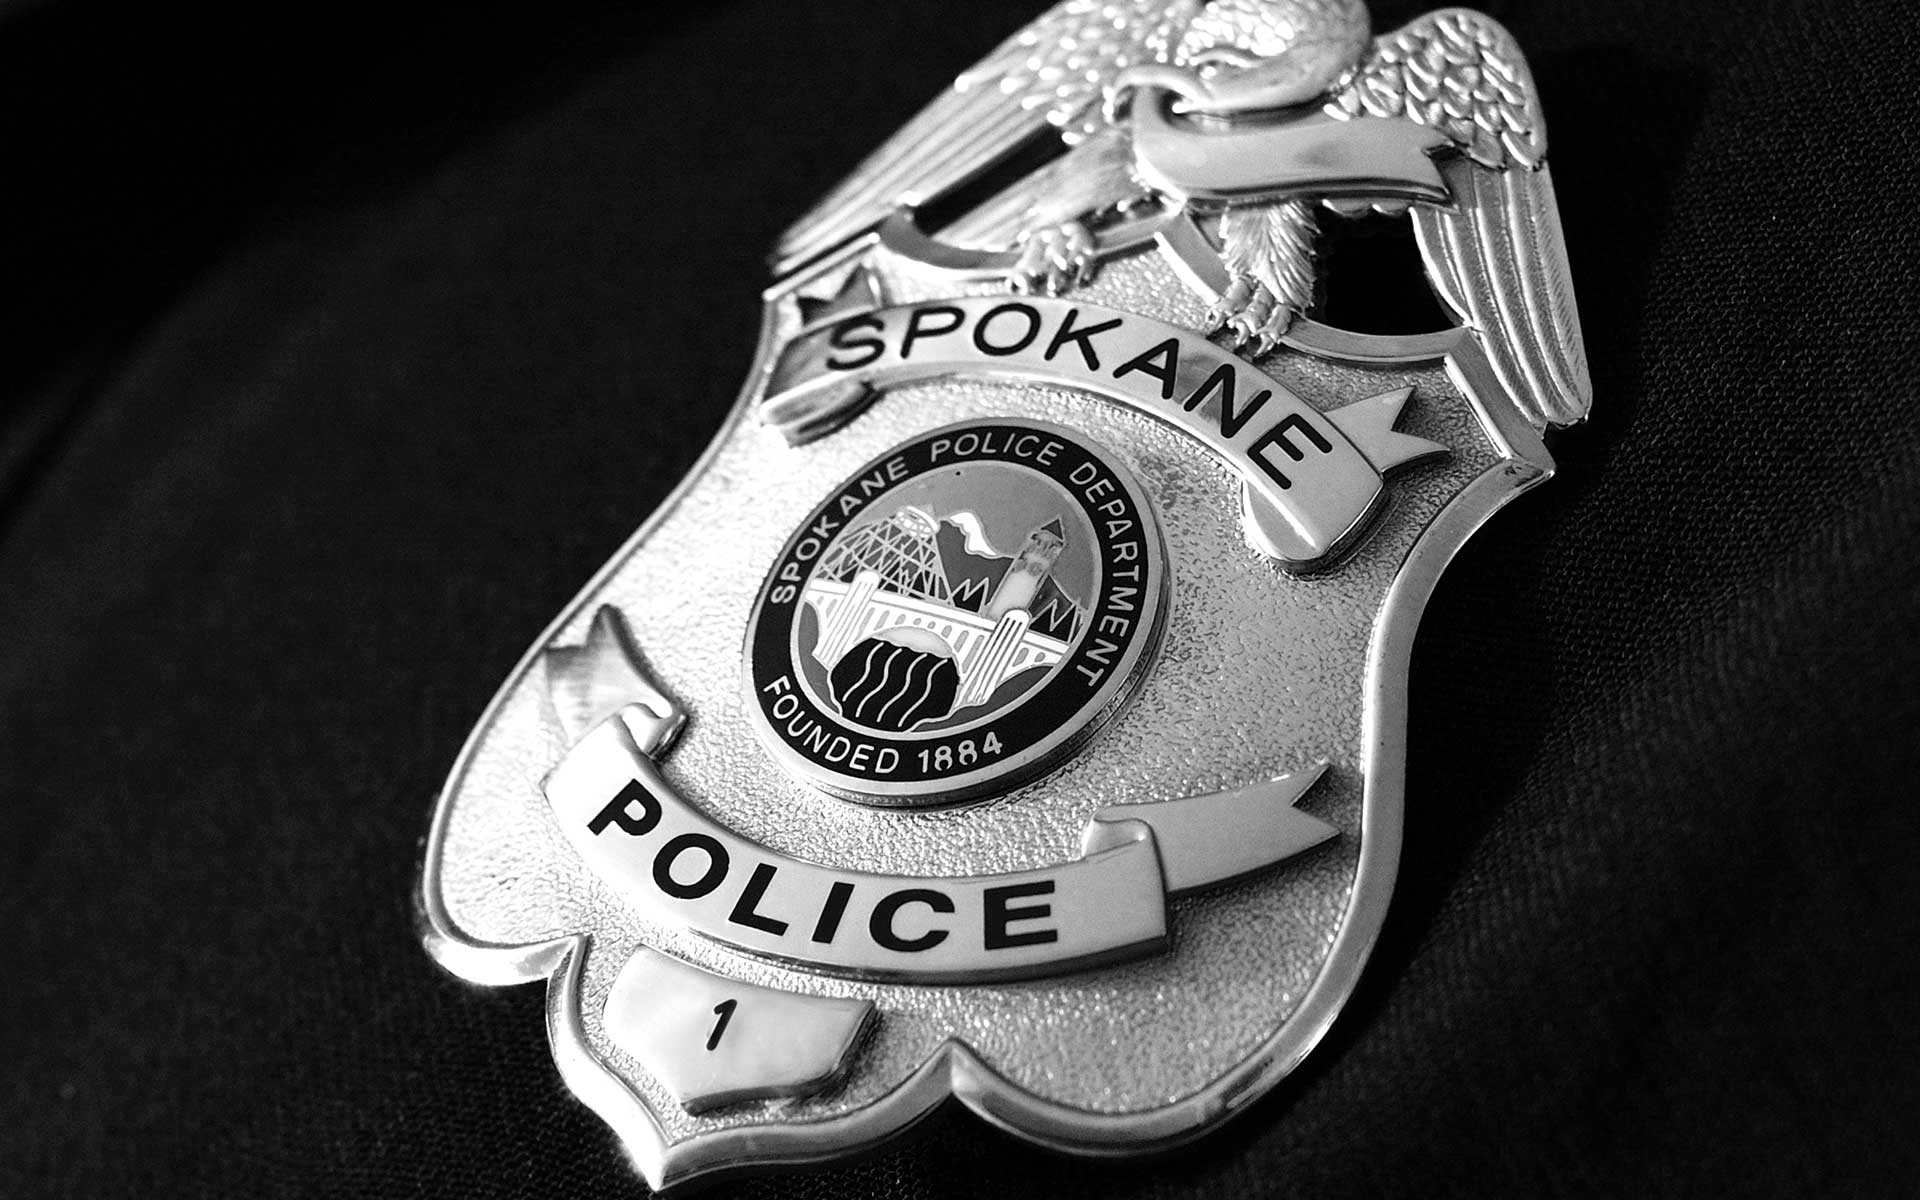  Spokane Police Officers Were Involved in an Officer Involved Shooting 